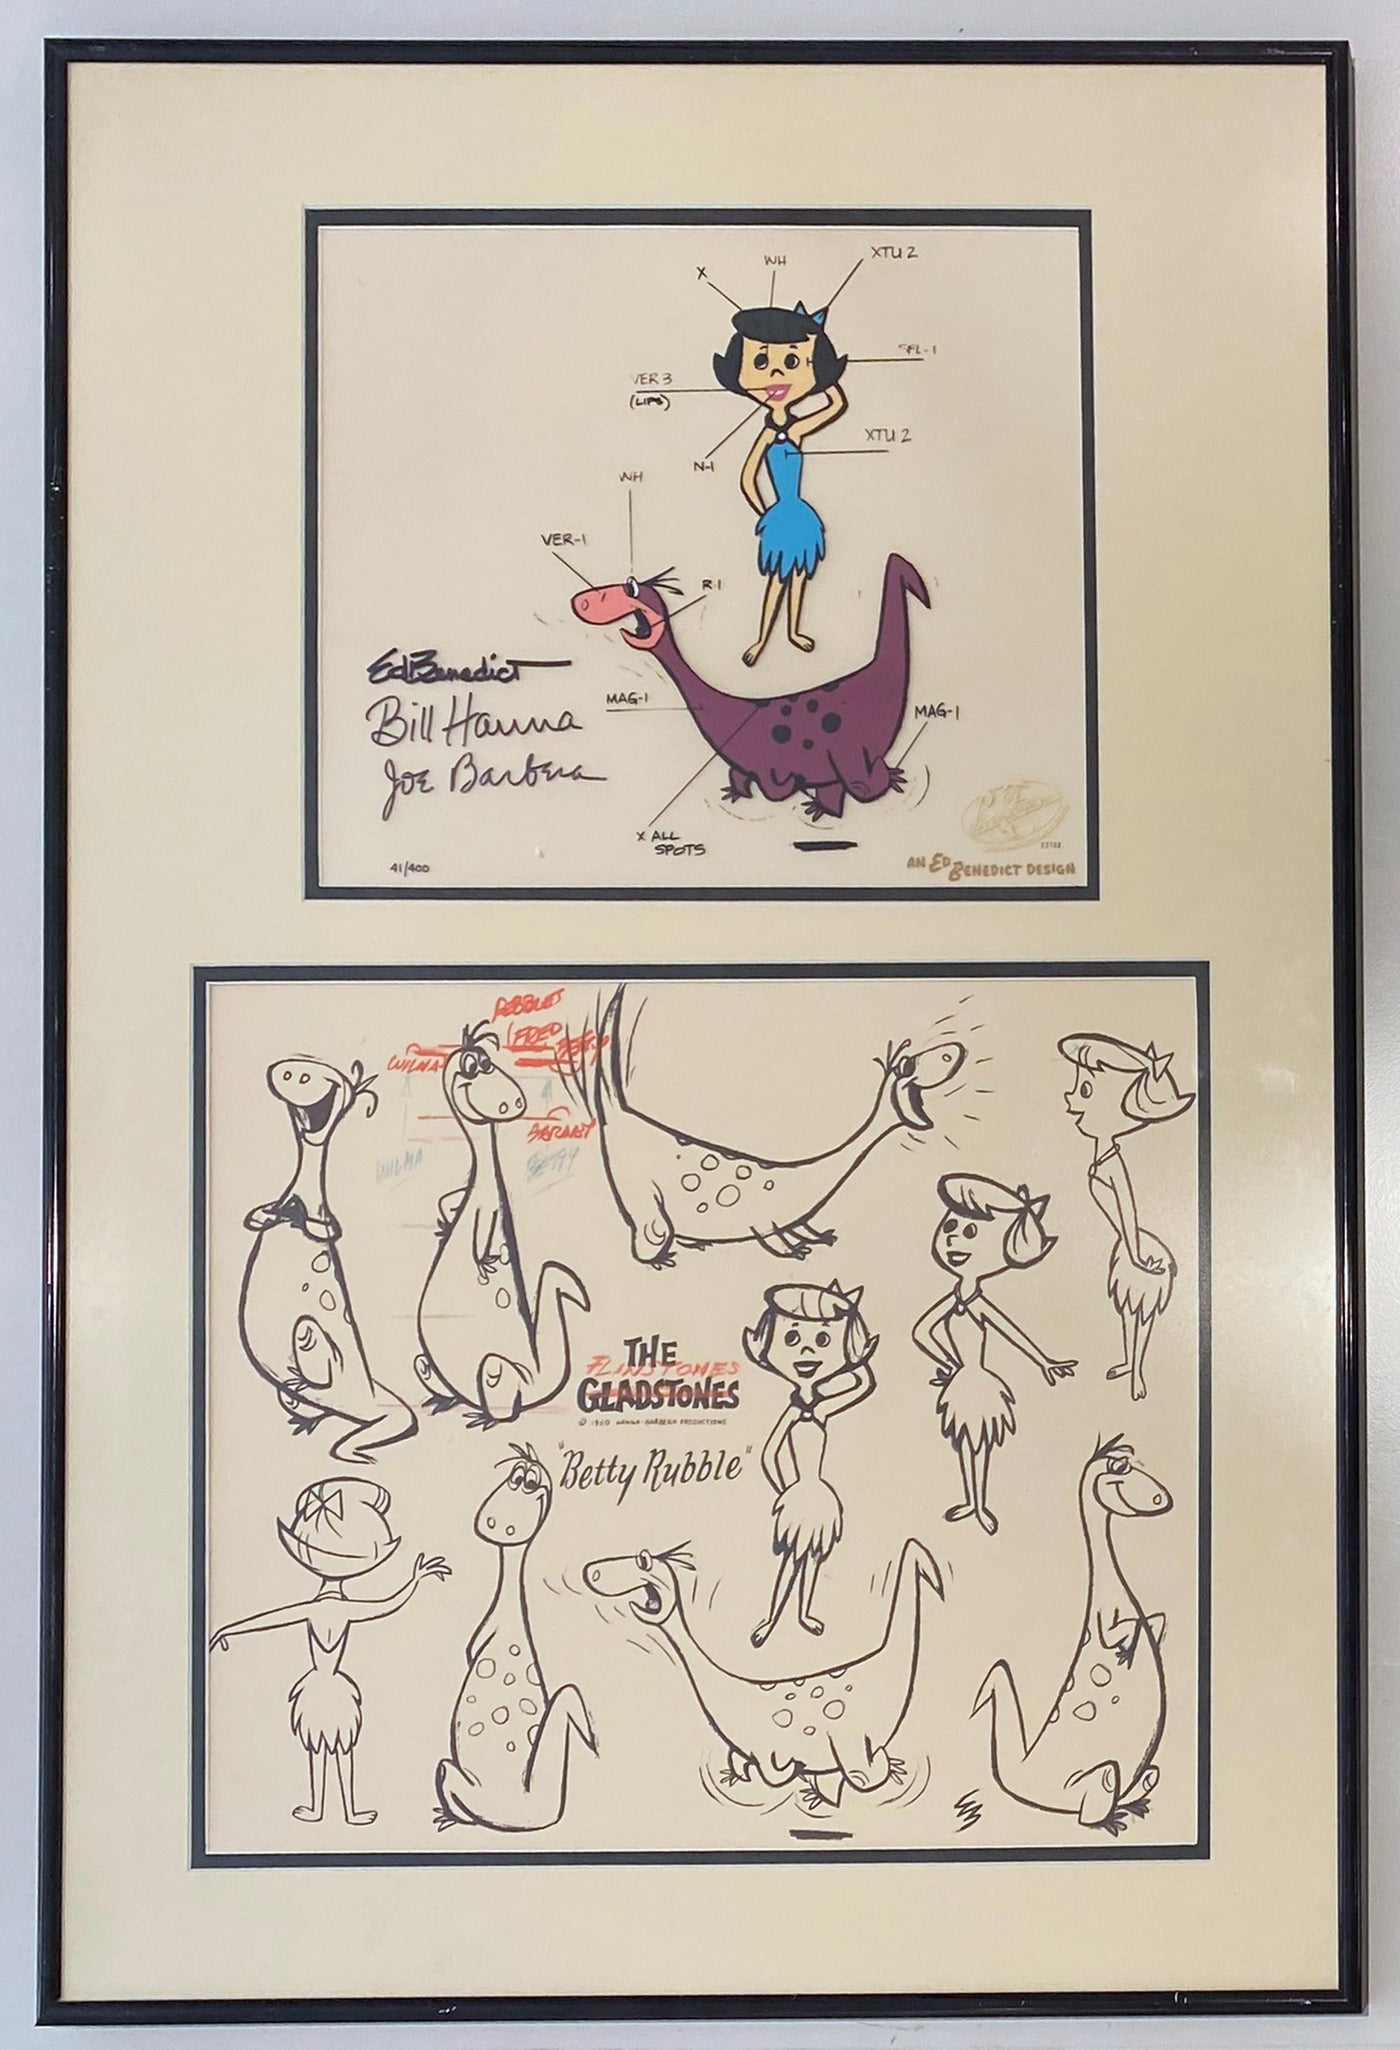 Original Hanna Barbera Limited Edition Cel and Model Sheet featuring Betty Rubble and Dino, Signed by Bill Hanna, Joe Barbera, and Ed Benedict